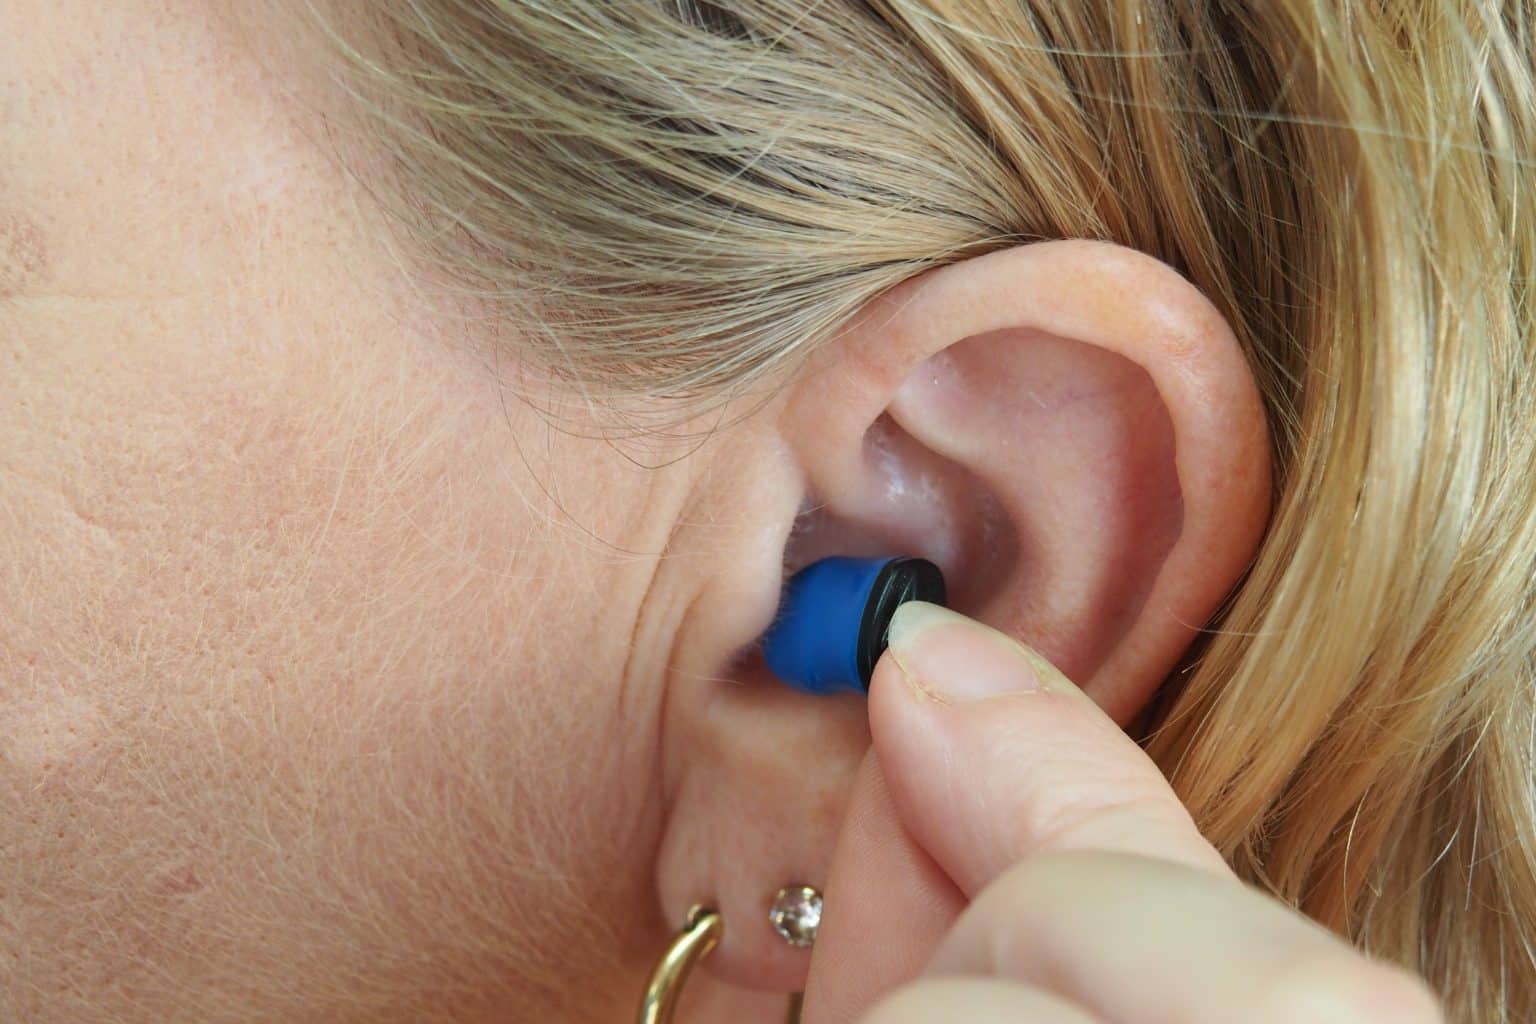 A blonde woman from Wichita Falls inserts blue hearing aid into her ear after performing hearing aid maintenance